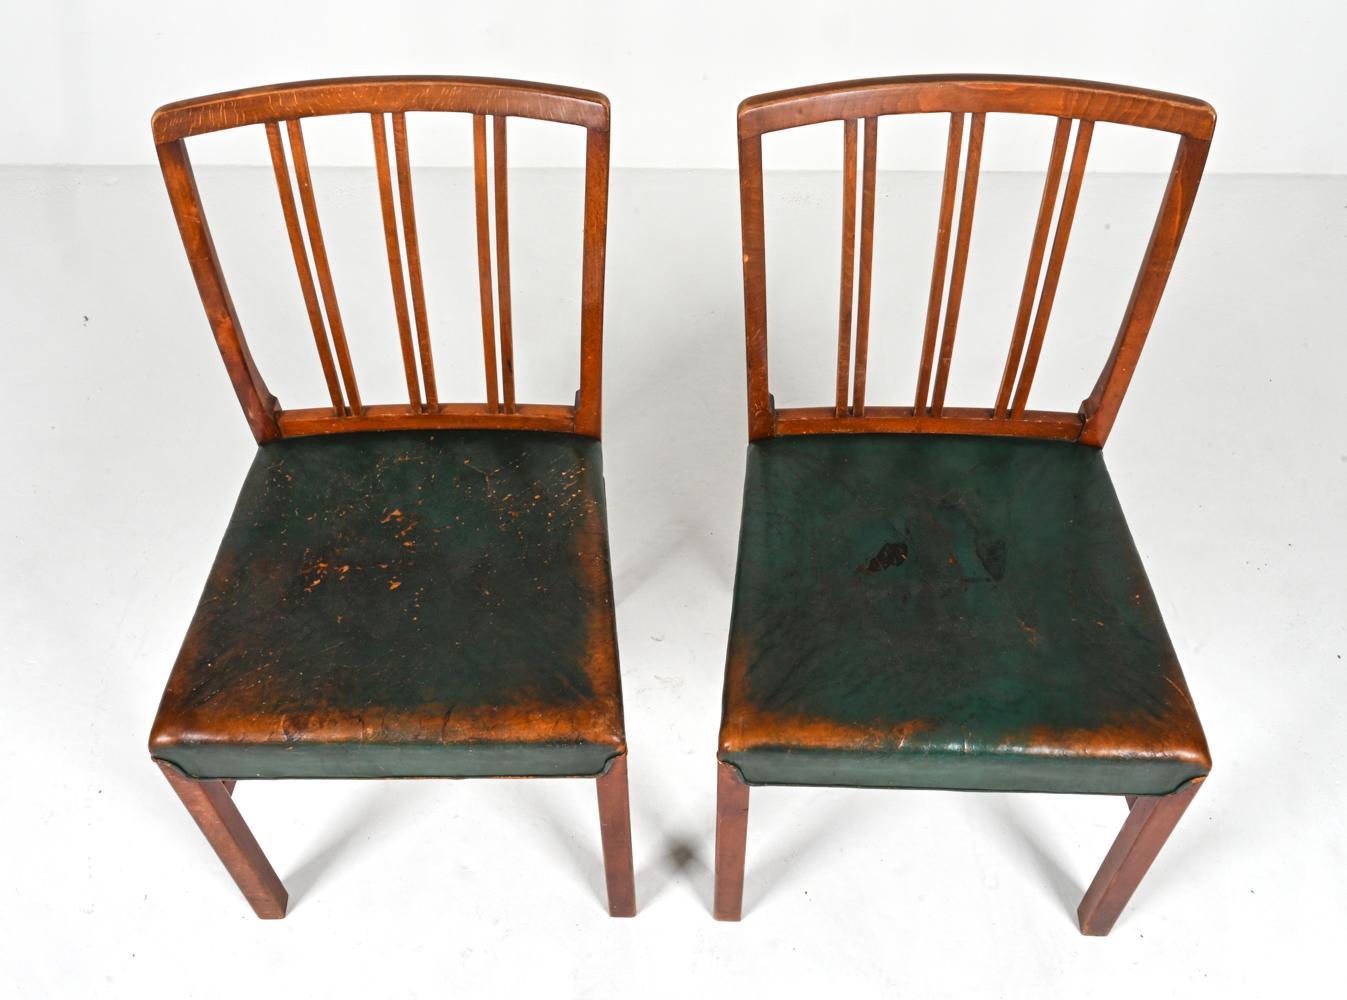 '12' Rare Model 1675B Dining Chairs by Ole Wanscher Fritz Hansen, c. 1940's For Sale 4